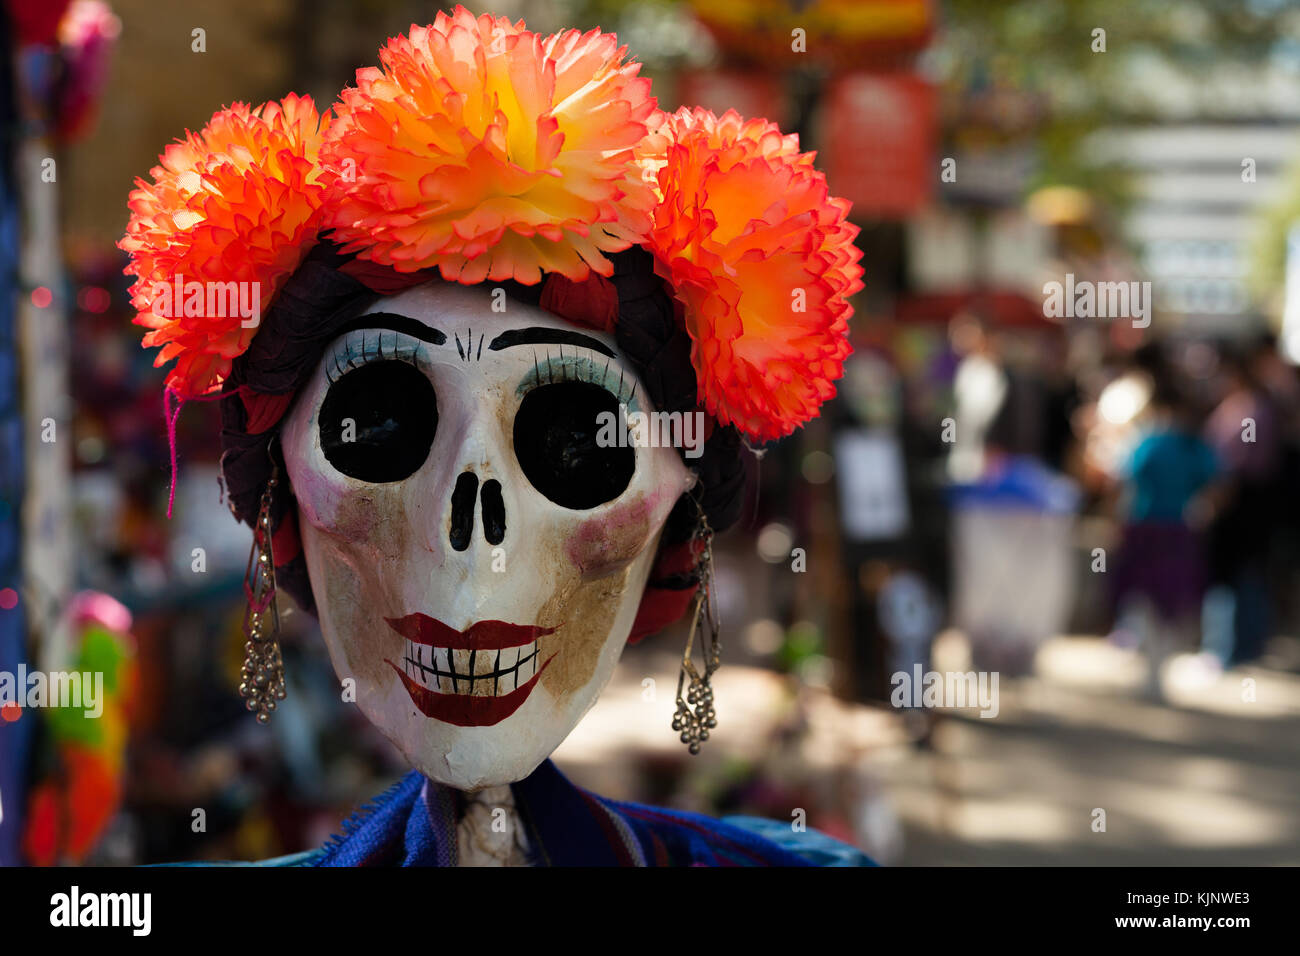 Skull painted and decorated with orange paper mache flowers and earrings/decorated skull for Dia de los Muertos, Day of the Dead Stock Photo